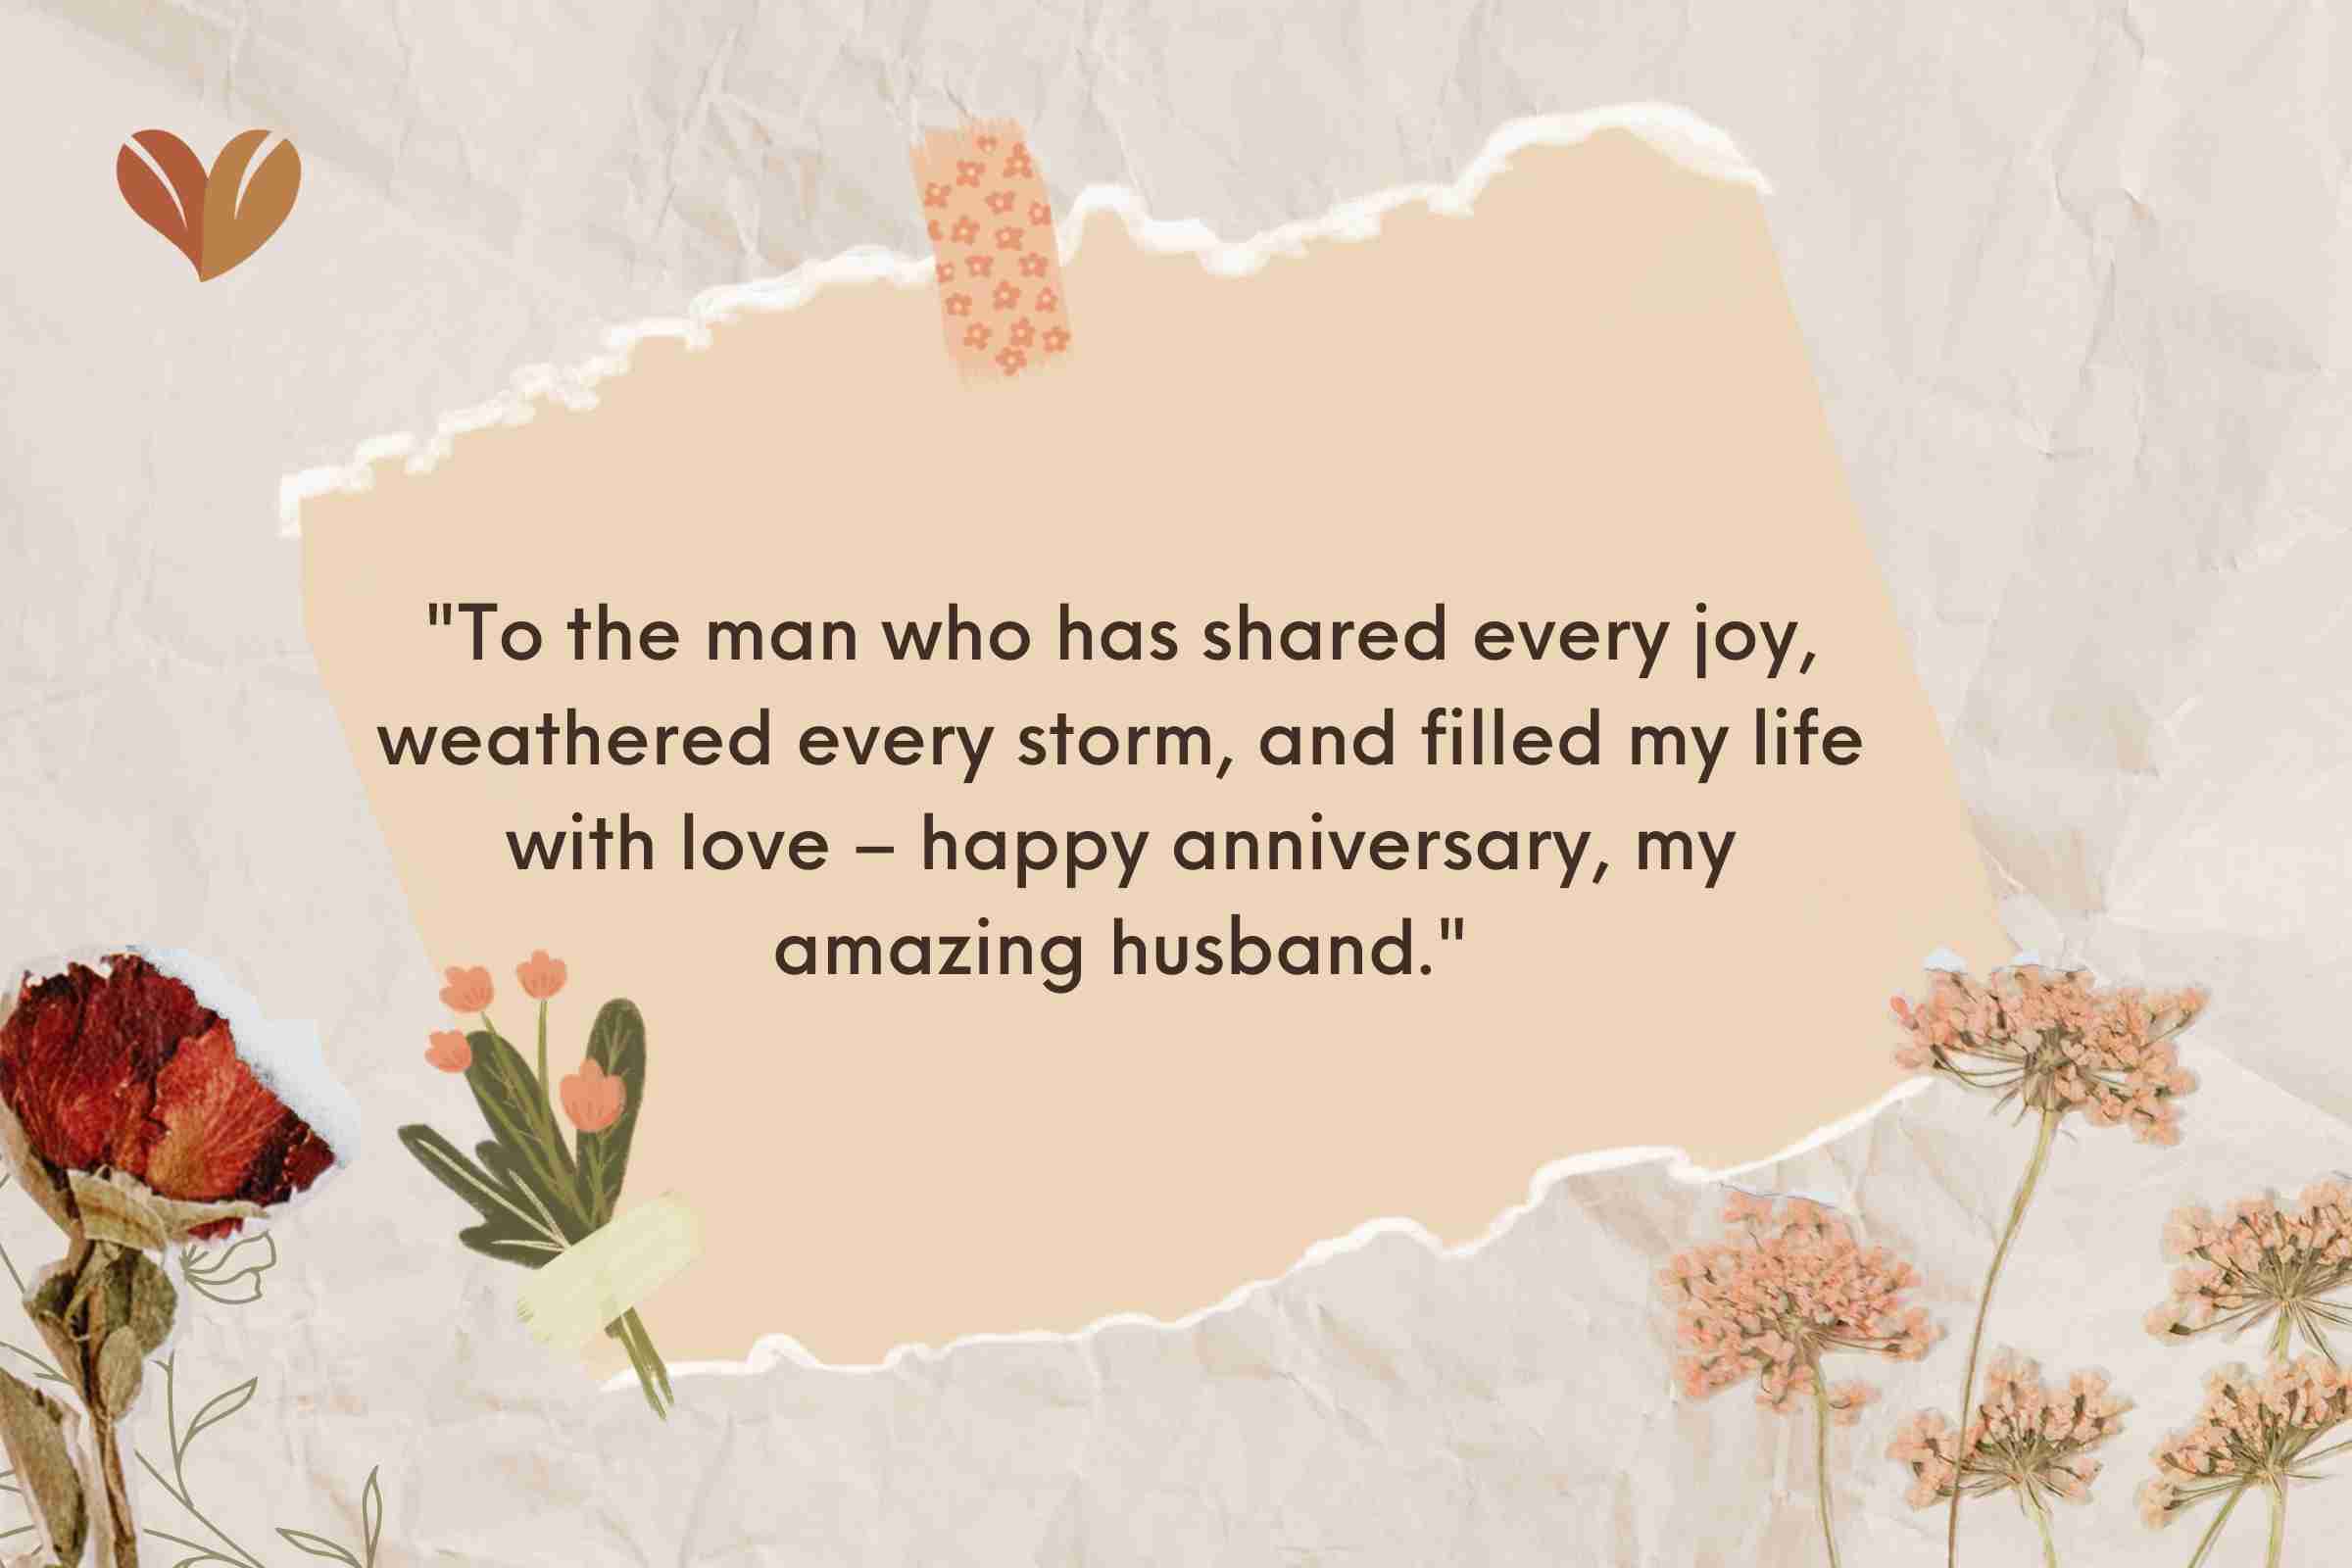 "To the man who has shared every joy, weathered every storm, and filled my life with love – happy anniversary, my amazing husband."